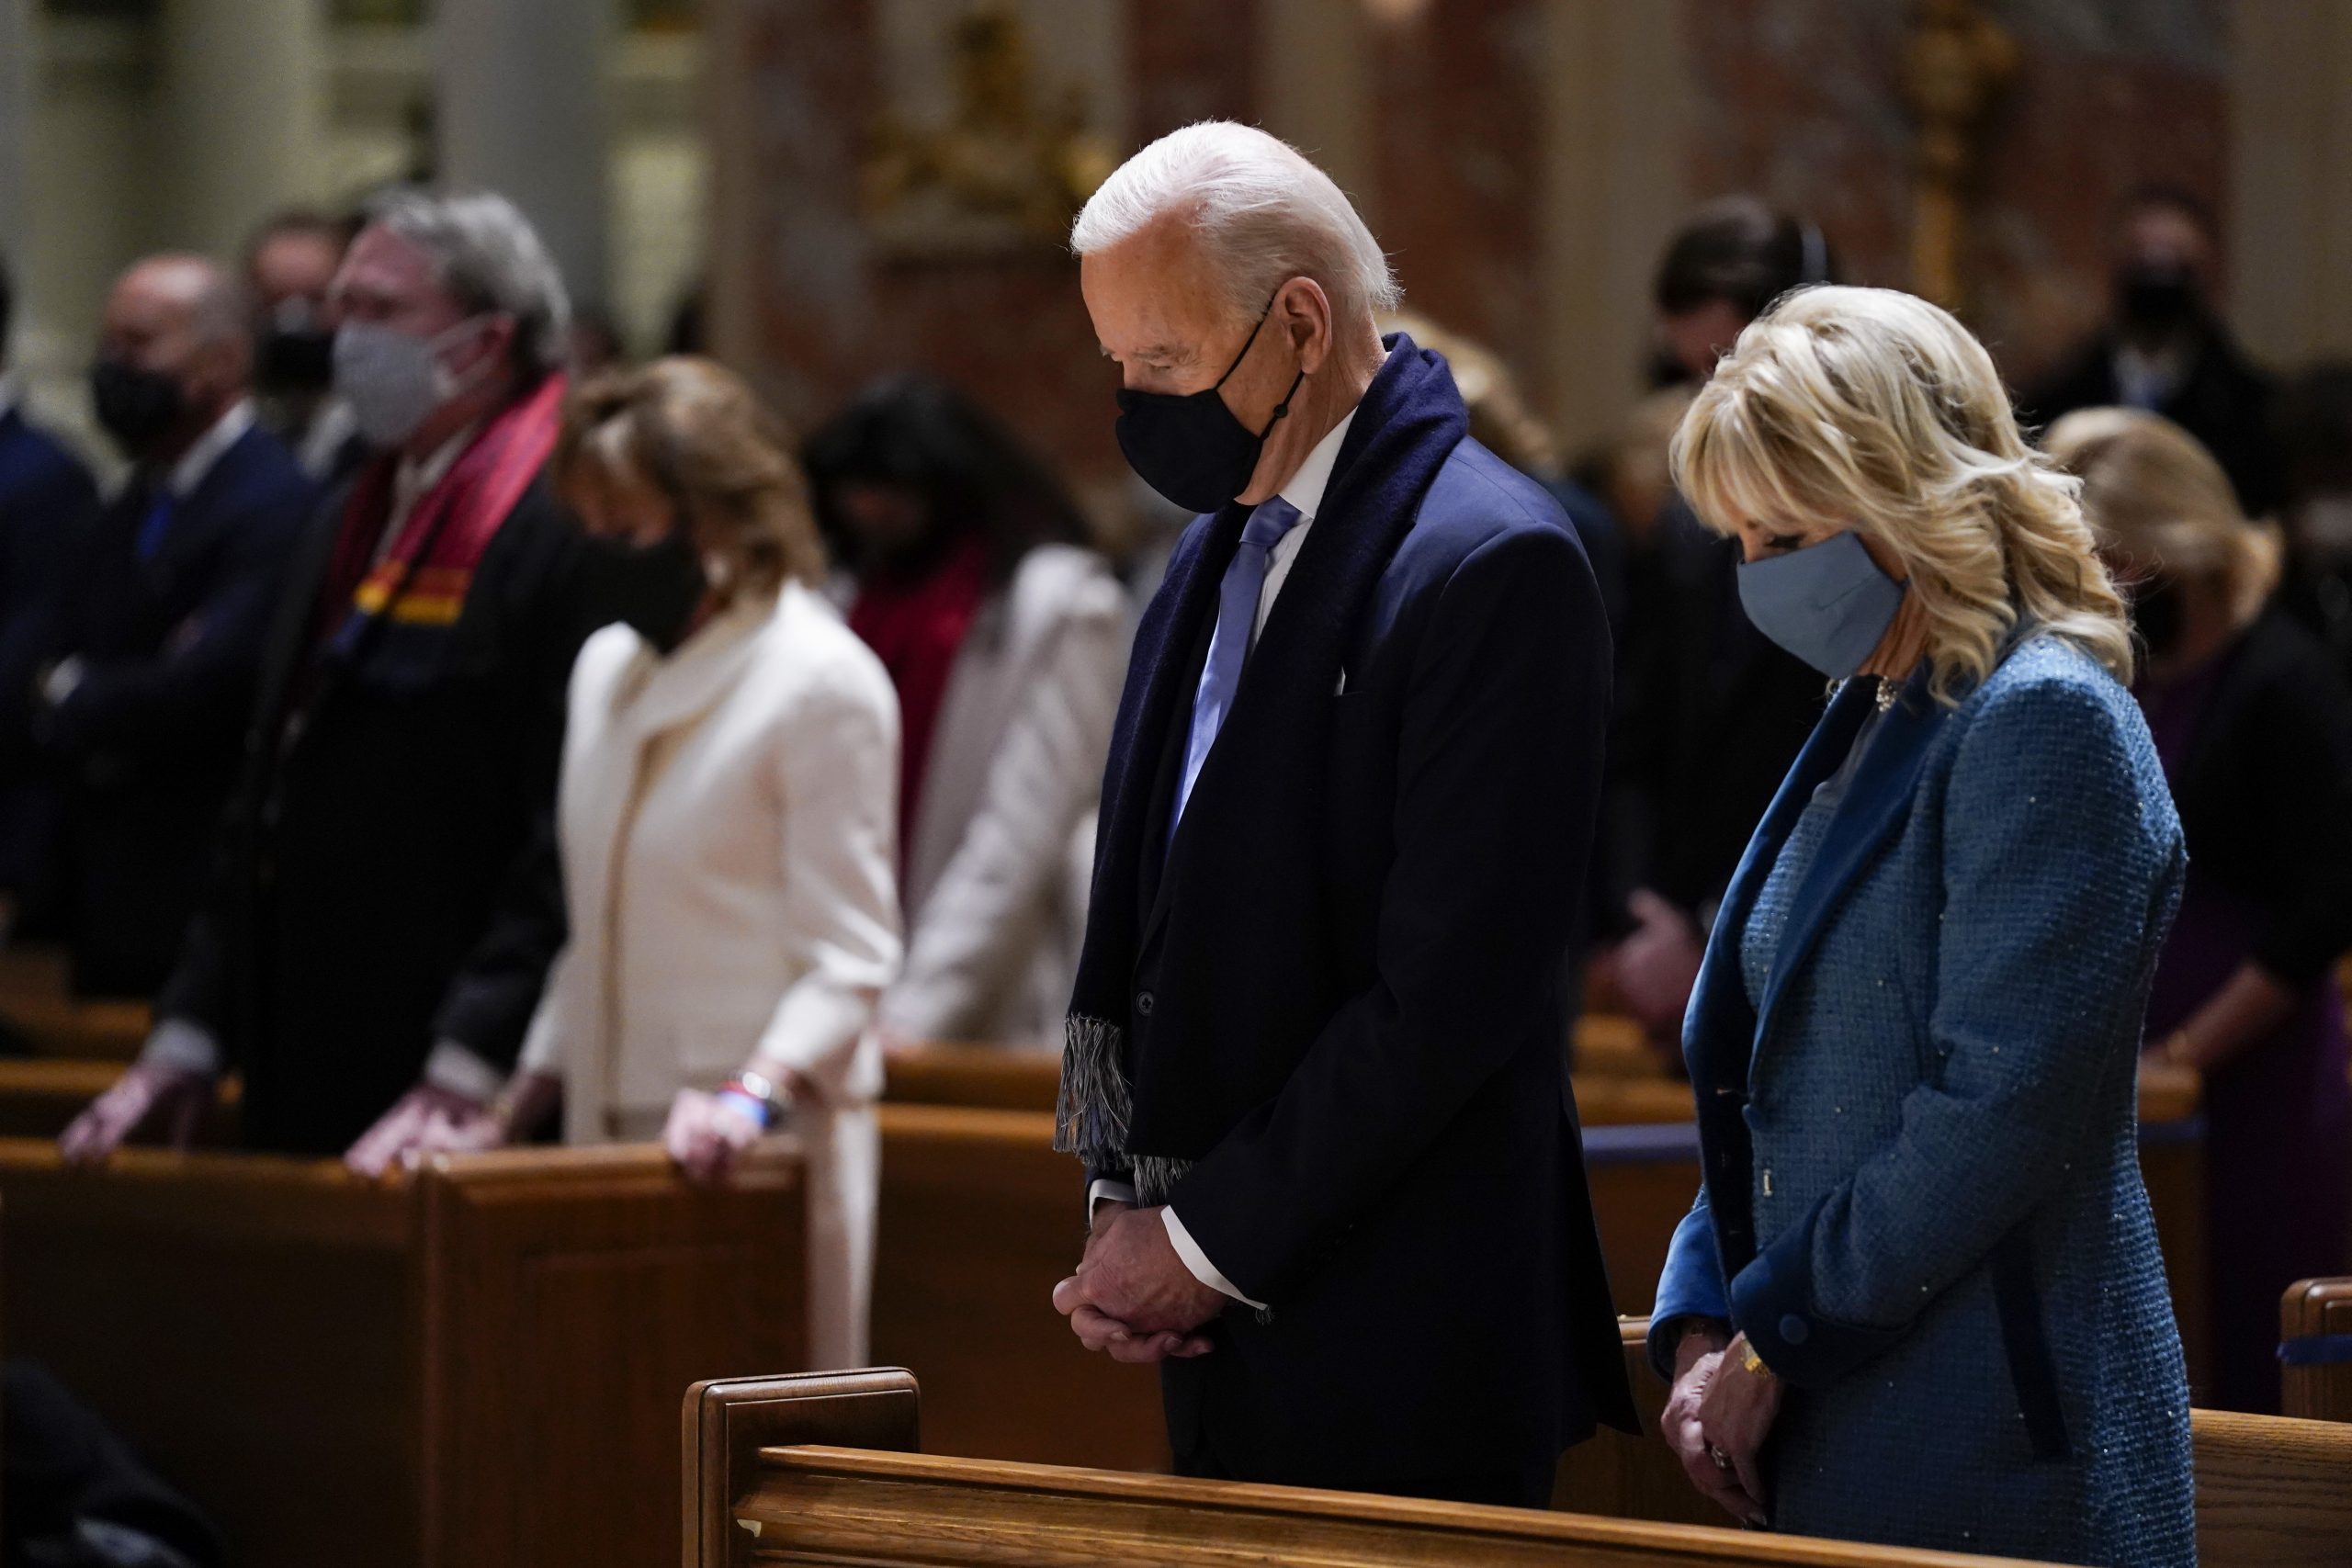 In this Jan. 20, 2021, file photo, President-elect Joe Biden and his wife, Jill Biden, attend Mass at the Cathedral of St. Matthew the Apostle during Inauguration Day ceremonies in Washington. When U.S. Catholic bishops hold their next national meeting in June 2021, they’ll be deciding whether to send a tougher-than-ever message to Biden and other Catholic politicians: Don’t partake of Communion if you persist in public advocacy of abortion rights. (AP Photo/Evan Vucci)